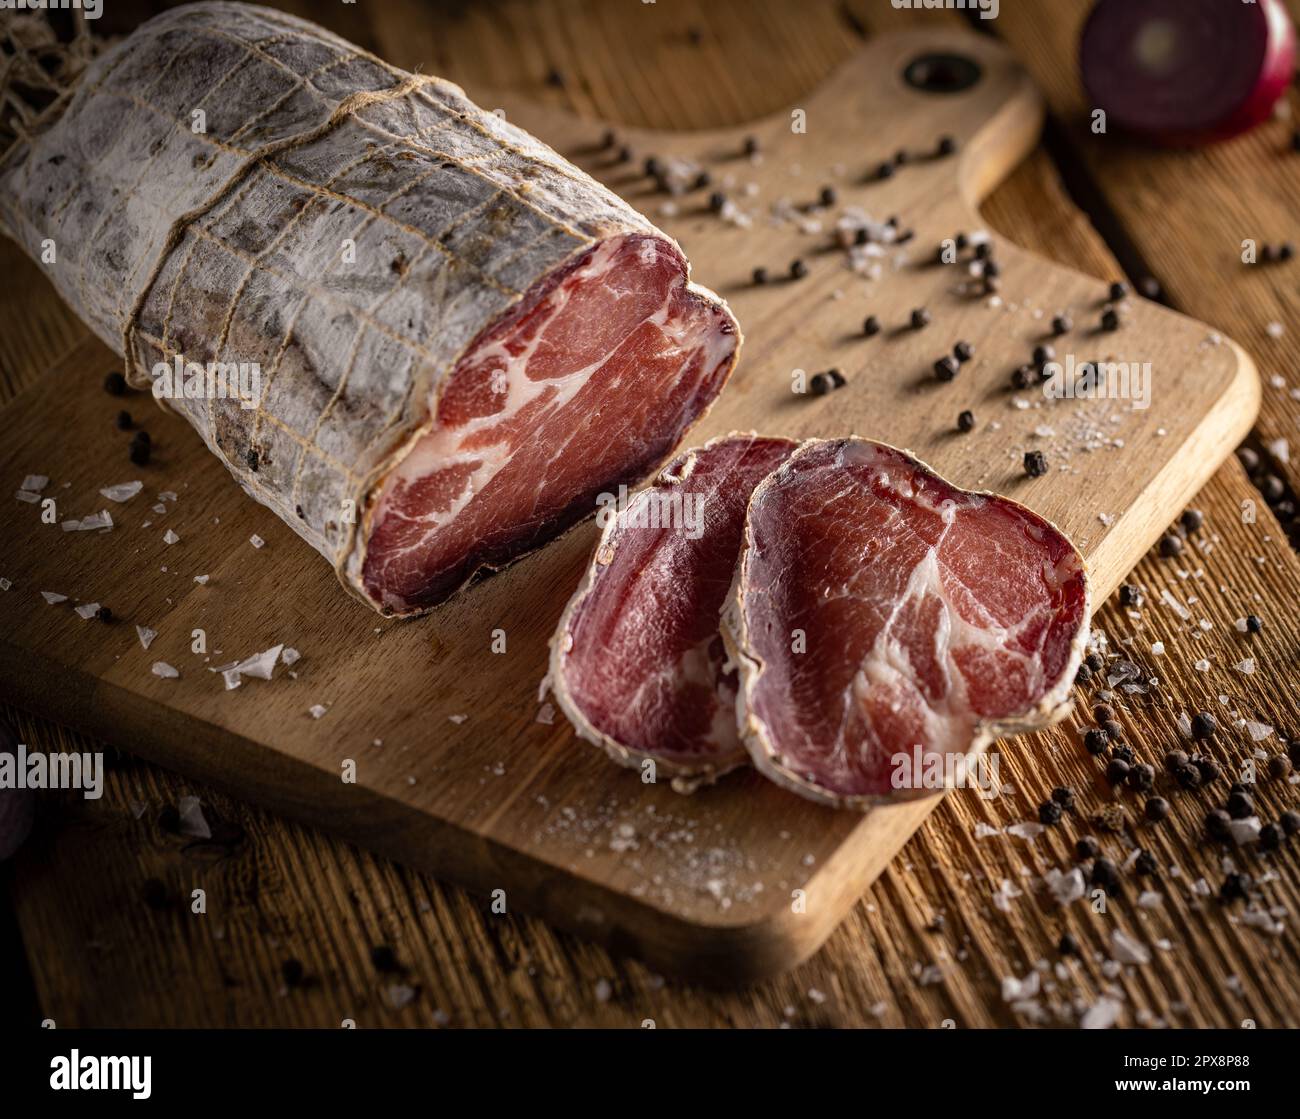 Cured coppa coated in noble mold on rustic wooden background Stock Photo